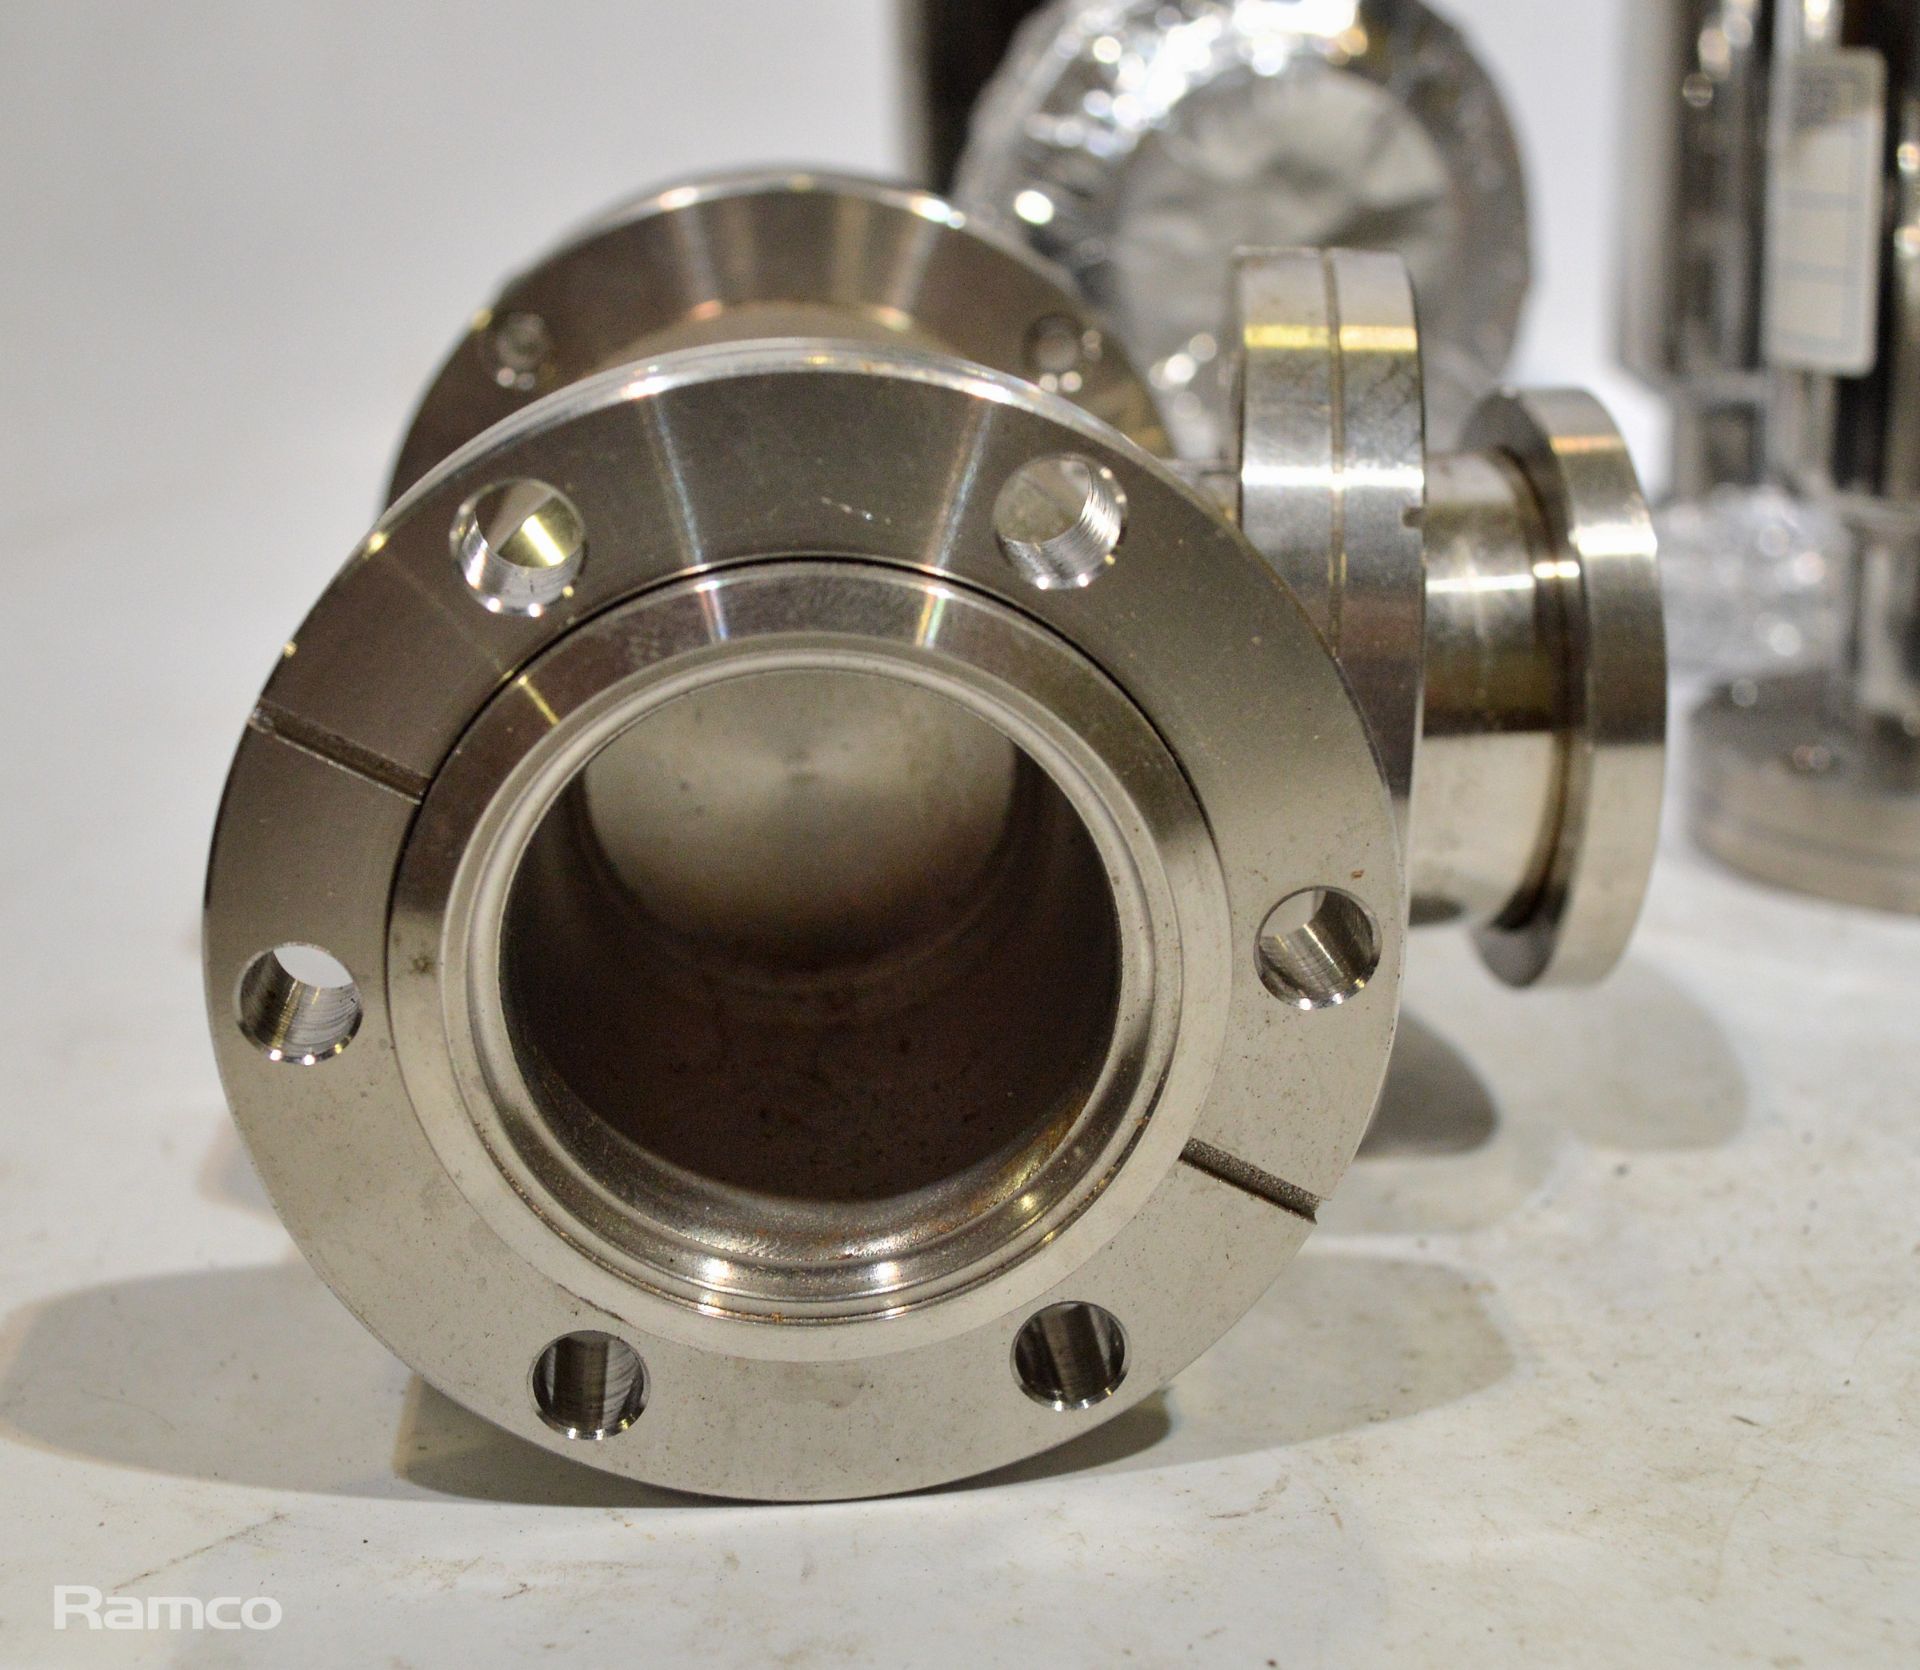 6x Scanwell Conflat Bellows Vacuum Valves - Image 4 of 5